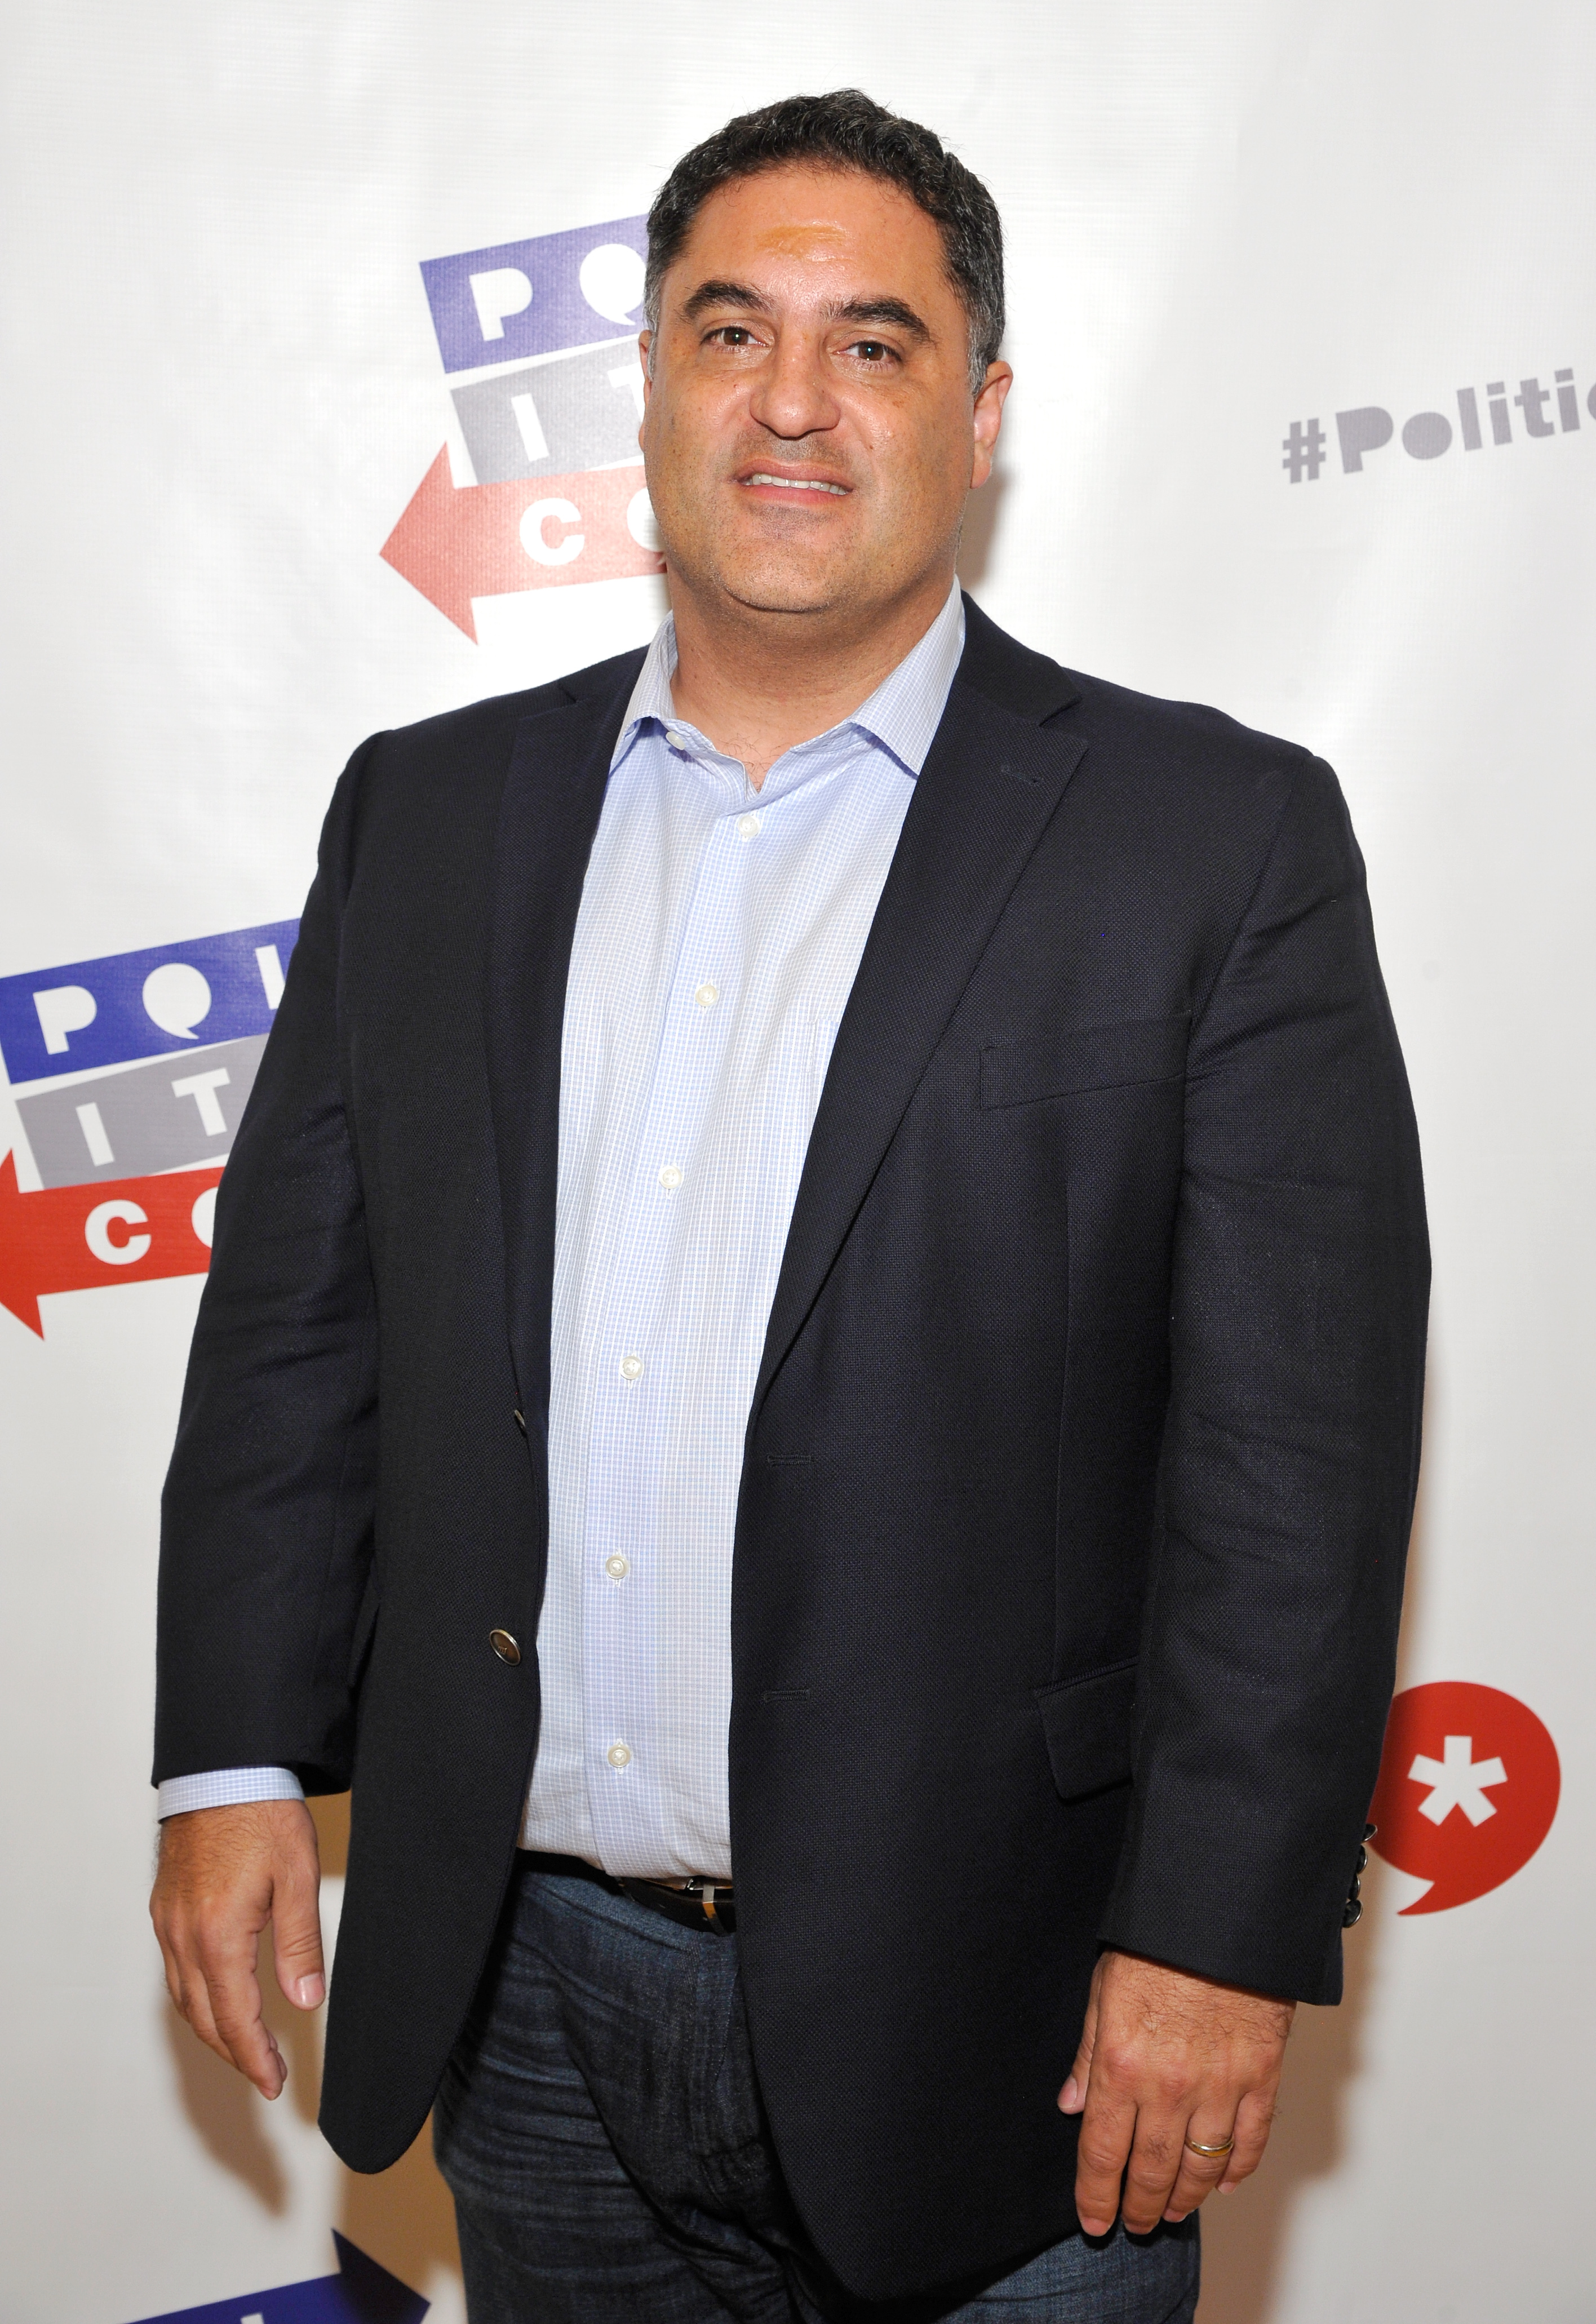 Cenk Uygur attends the second day of Politicon 2017 at Pasadena Convention Center on July 30, 2017 in Pasadena, California. | Source: Getty Images